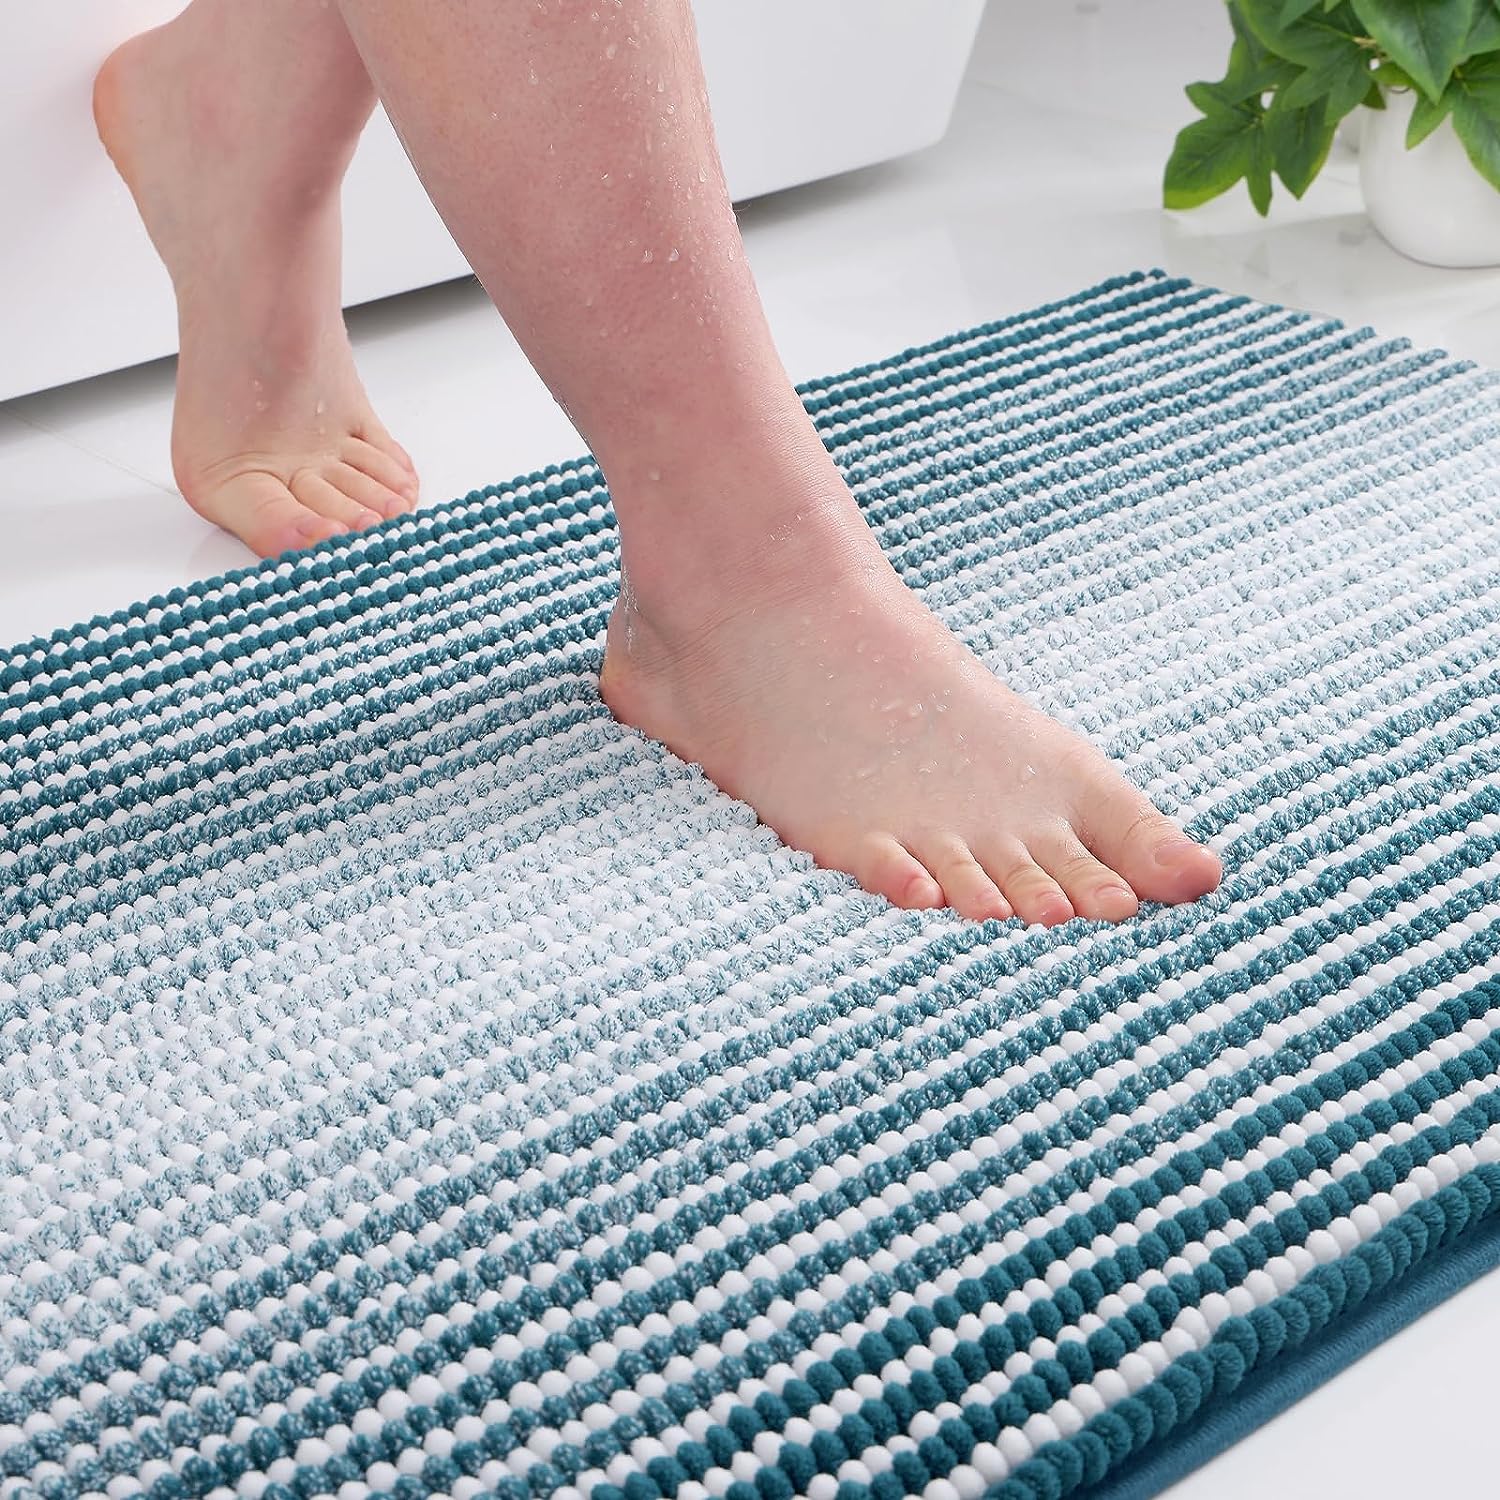 Colorxy Chenille Bathroom Rugs, Extra Soft and Absorbent Bath Mat, Non-Slip  Mach